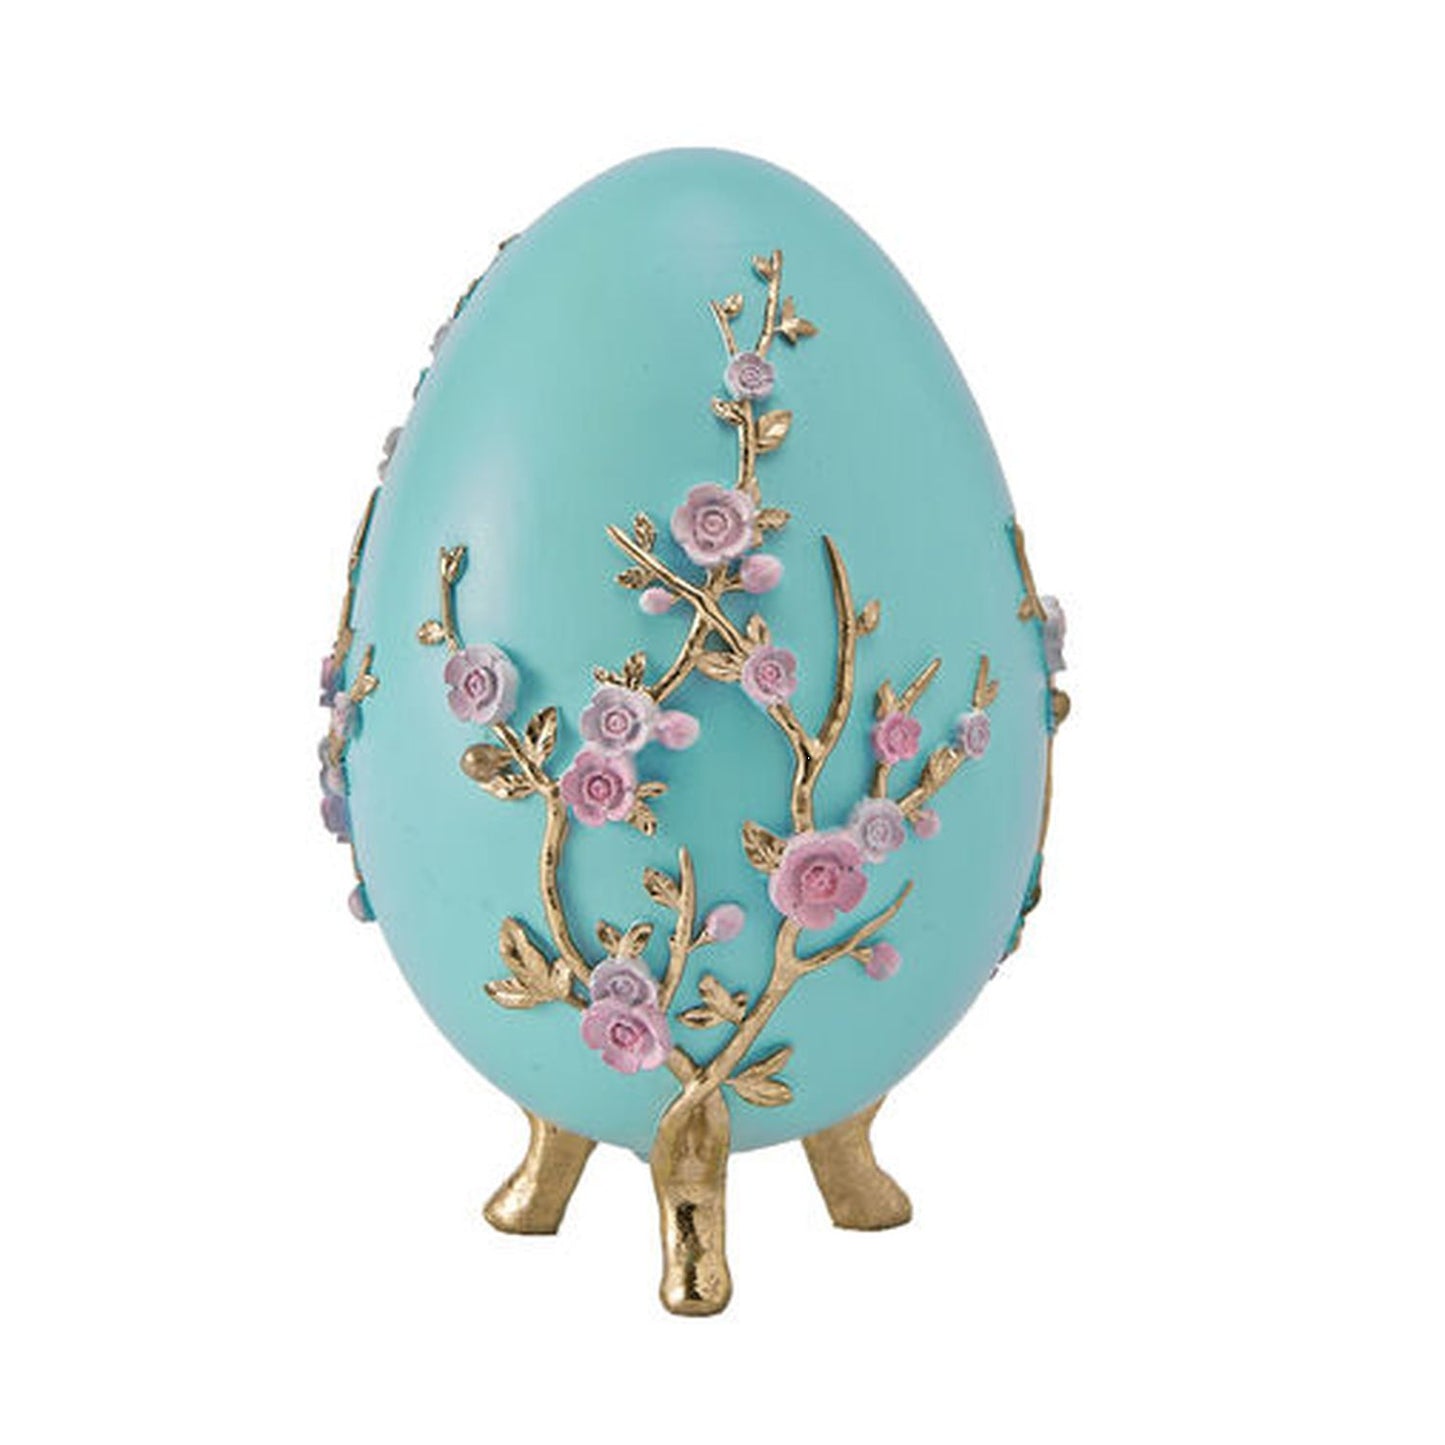 December Diamonds Spring Confections 7" Teal Egg With Pink Flowers